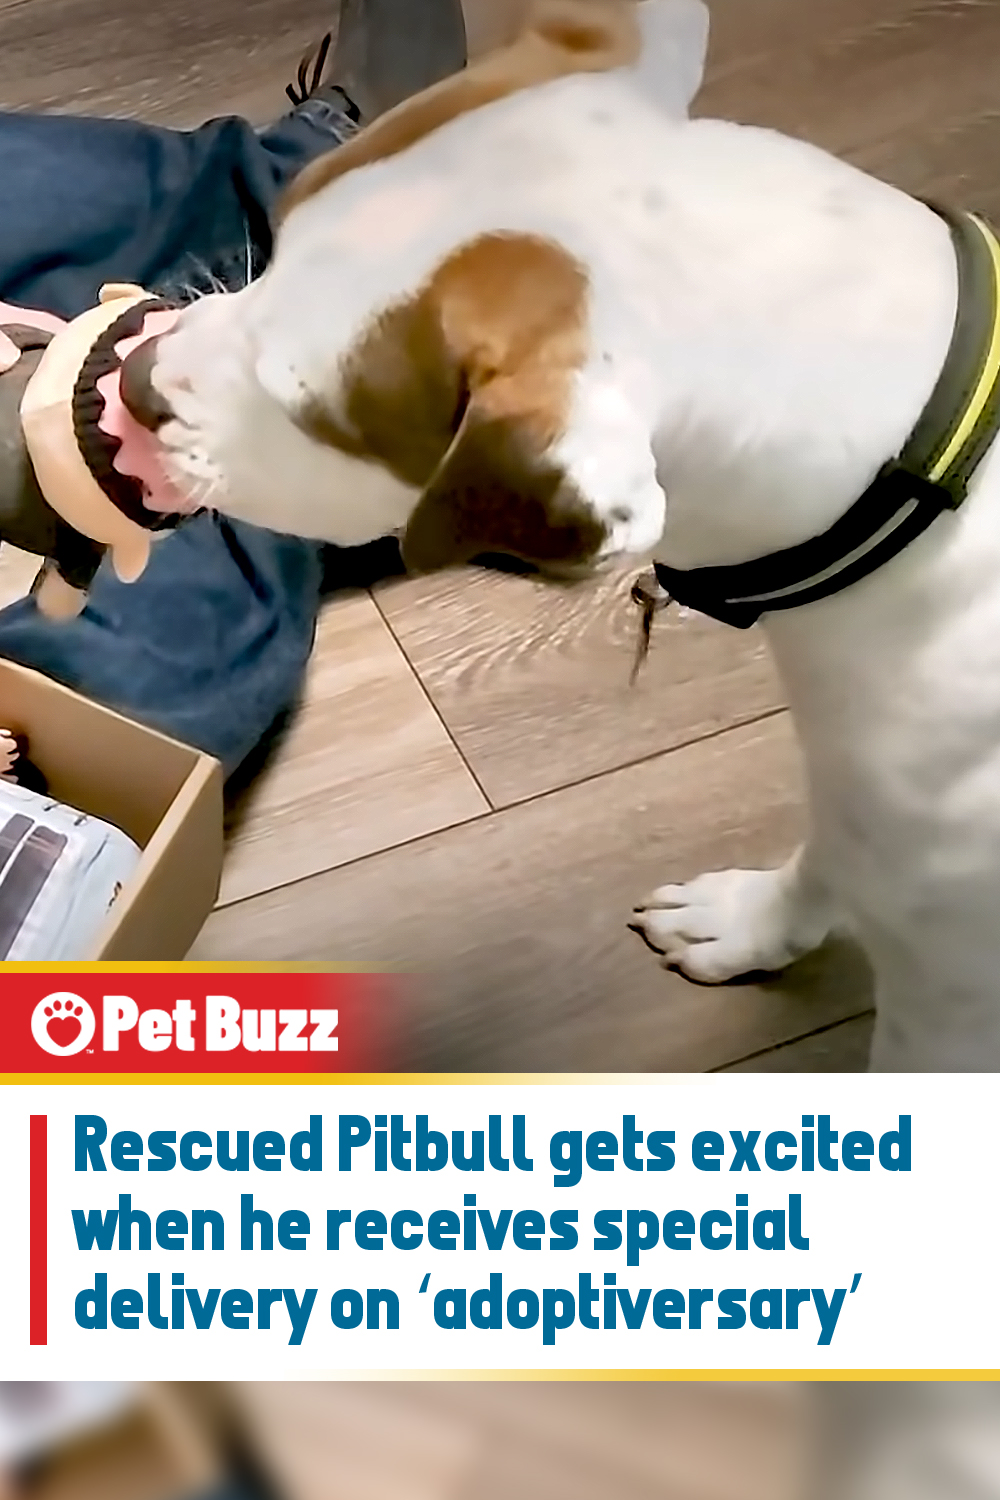 Rescued Pitbull gets excited when he receives special delivery on ‘adoptiversary’